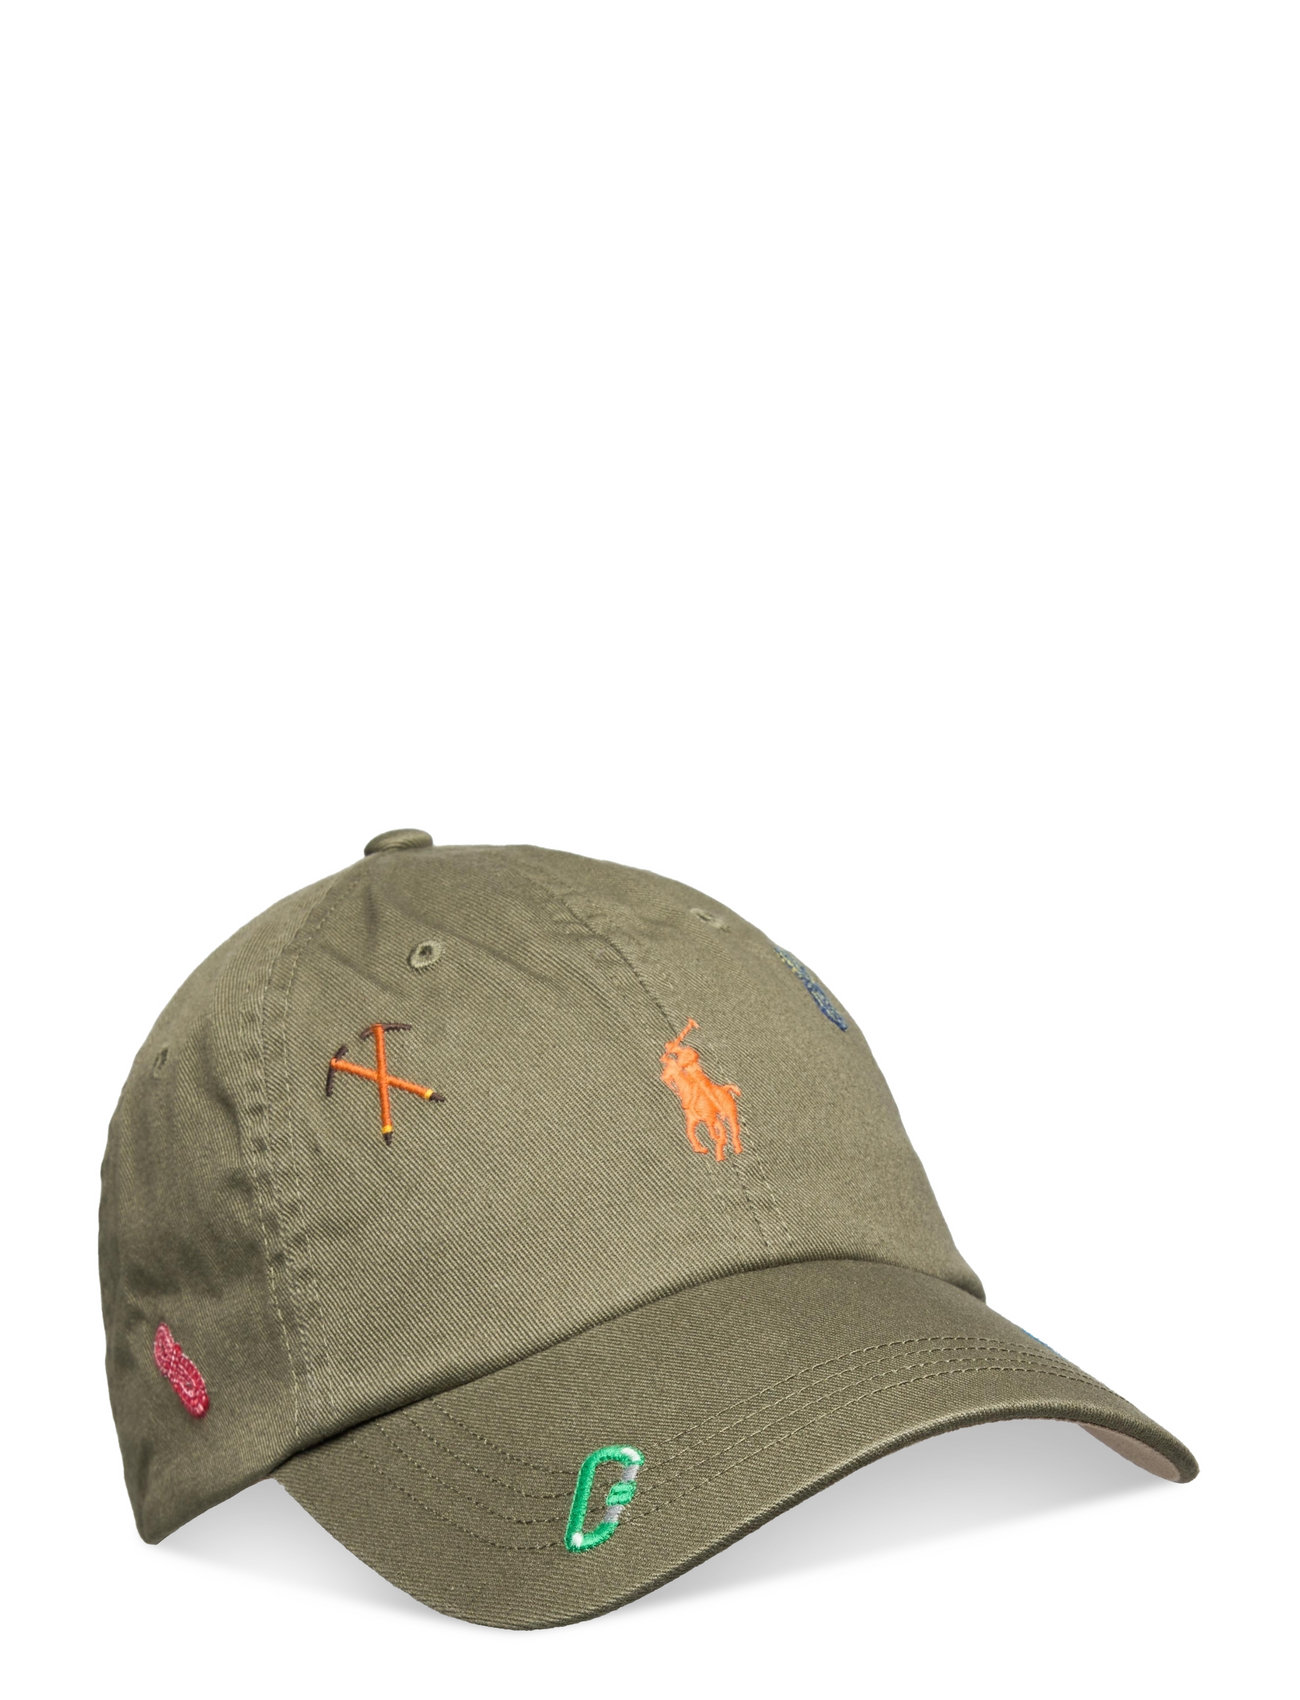 Polo Ralph Lauren Embroidered Twill Ball Cap - Caps 